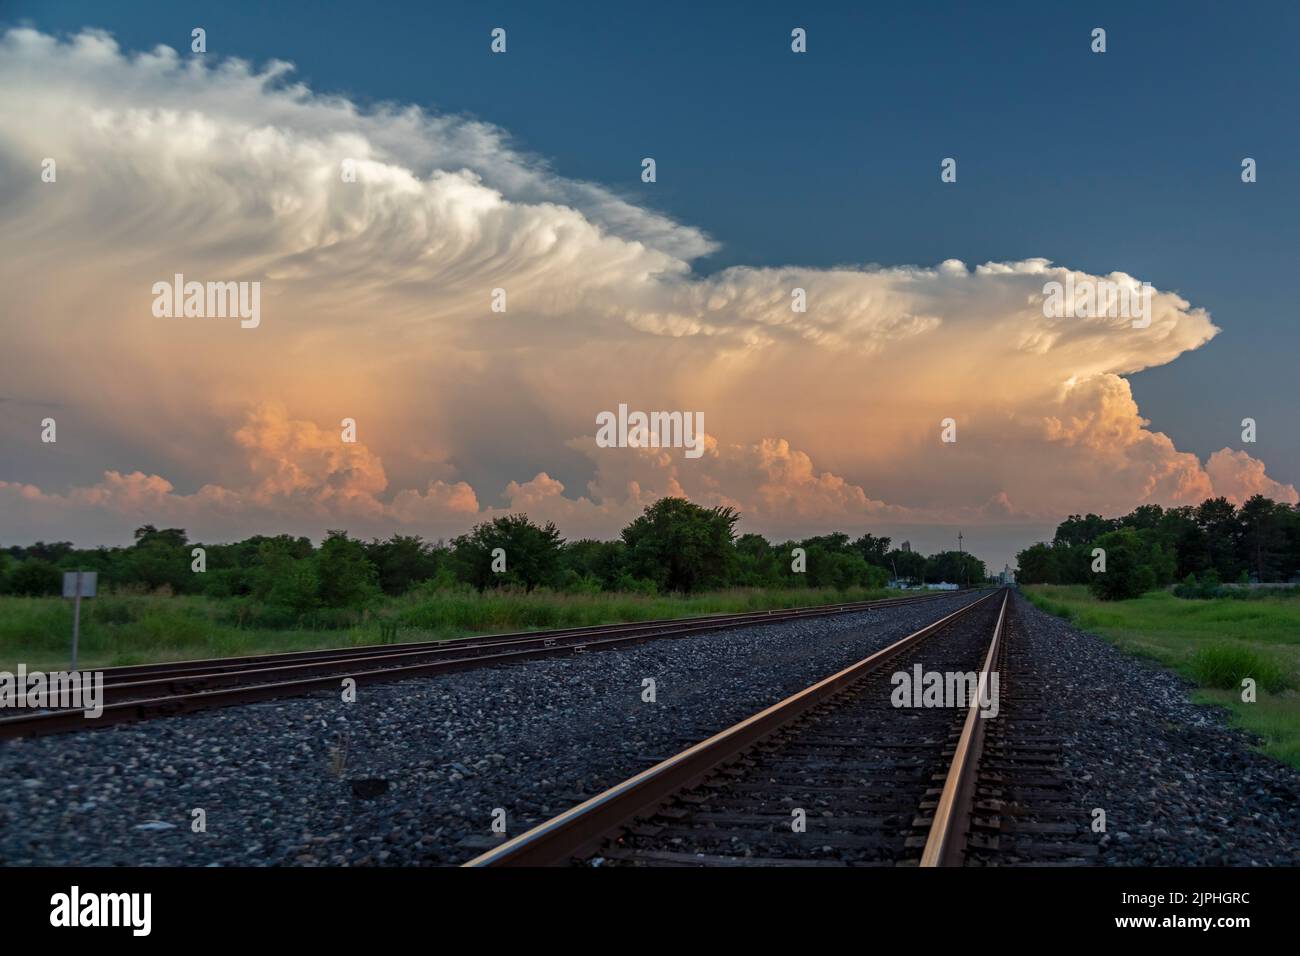 Hutchinson, Kansas - Storm clouds over railroad tracks at sunset in central Kansas. Stock Photo